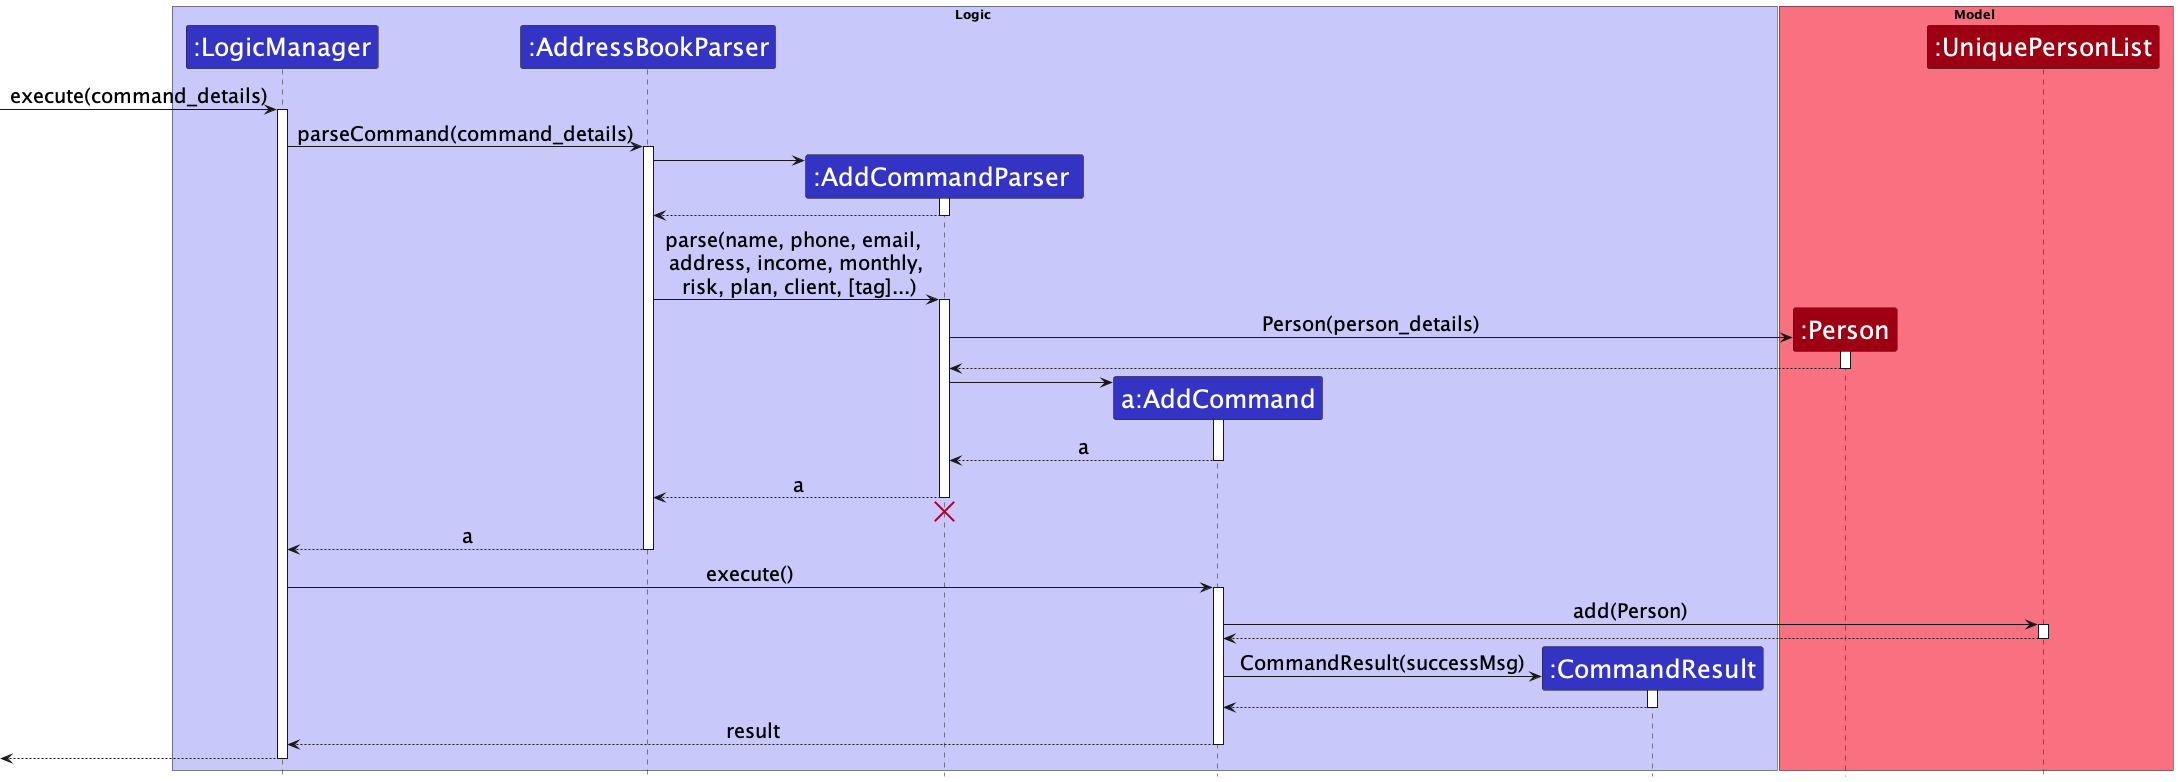 Add Sequence Diagram